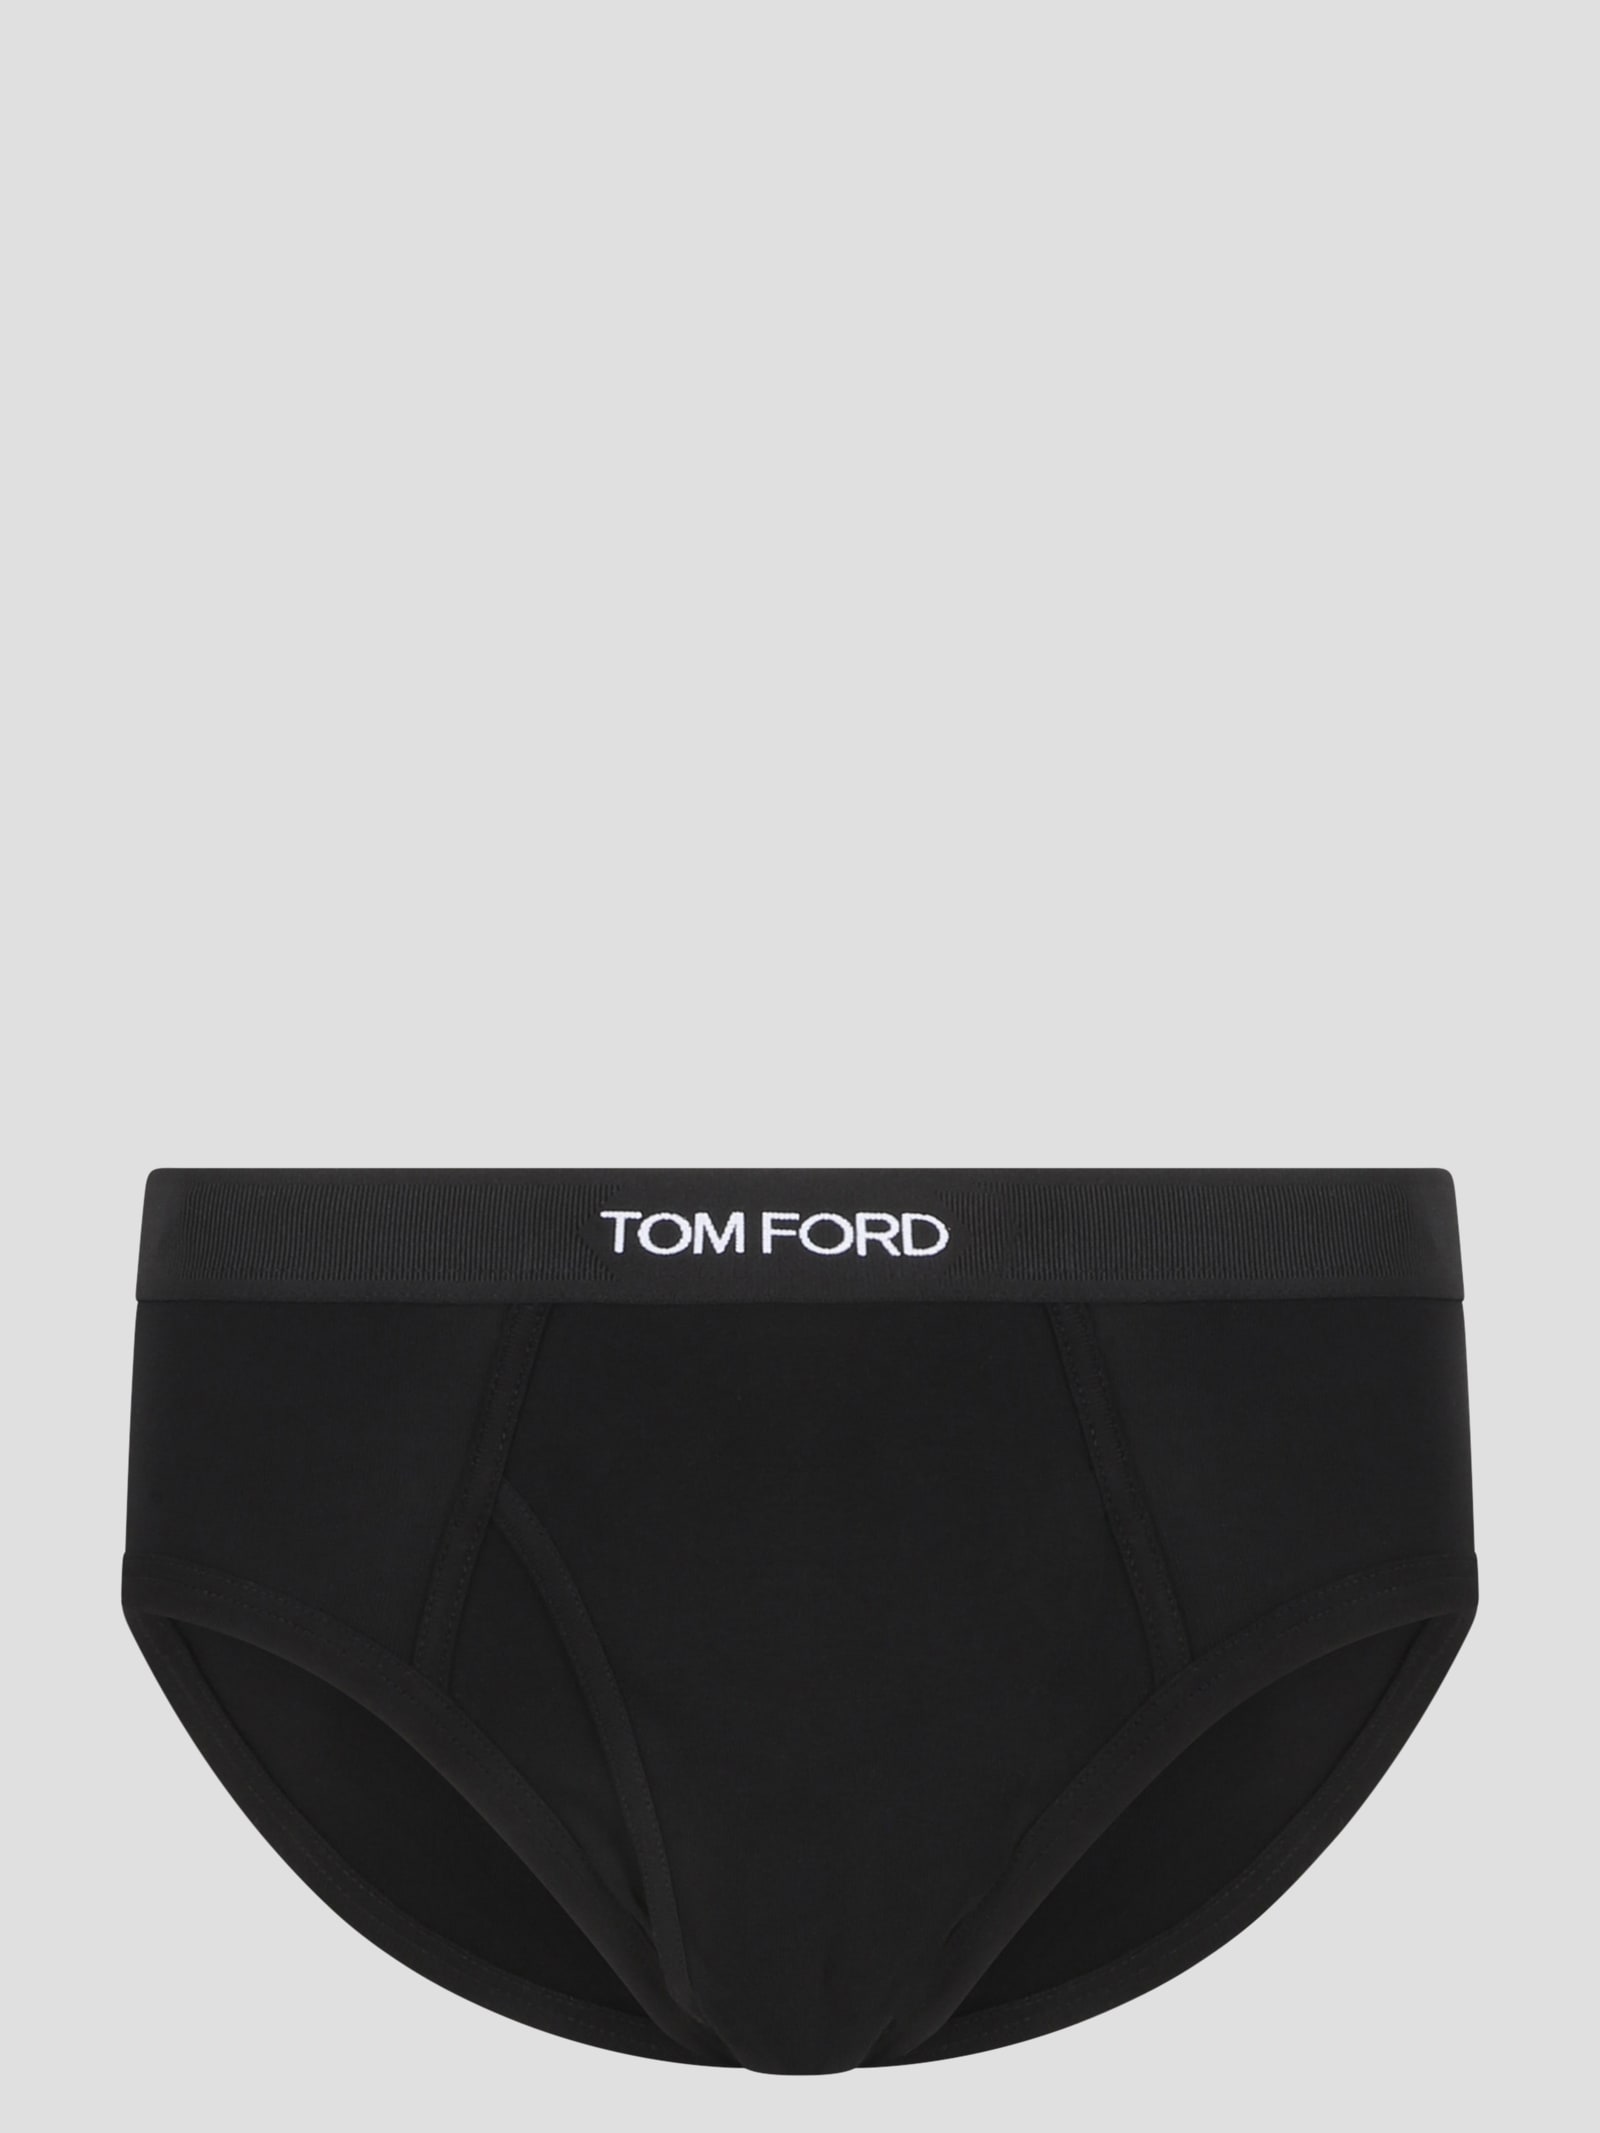 Tom Ford Bipack Cotton Briefs